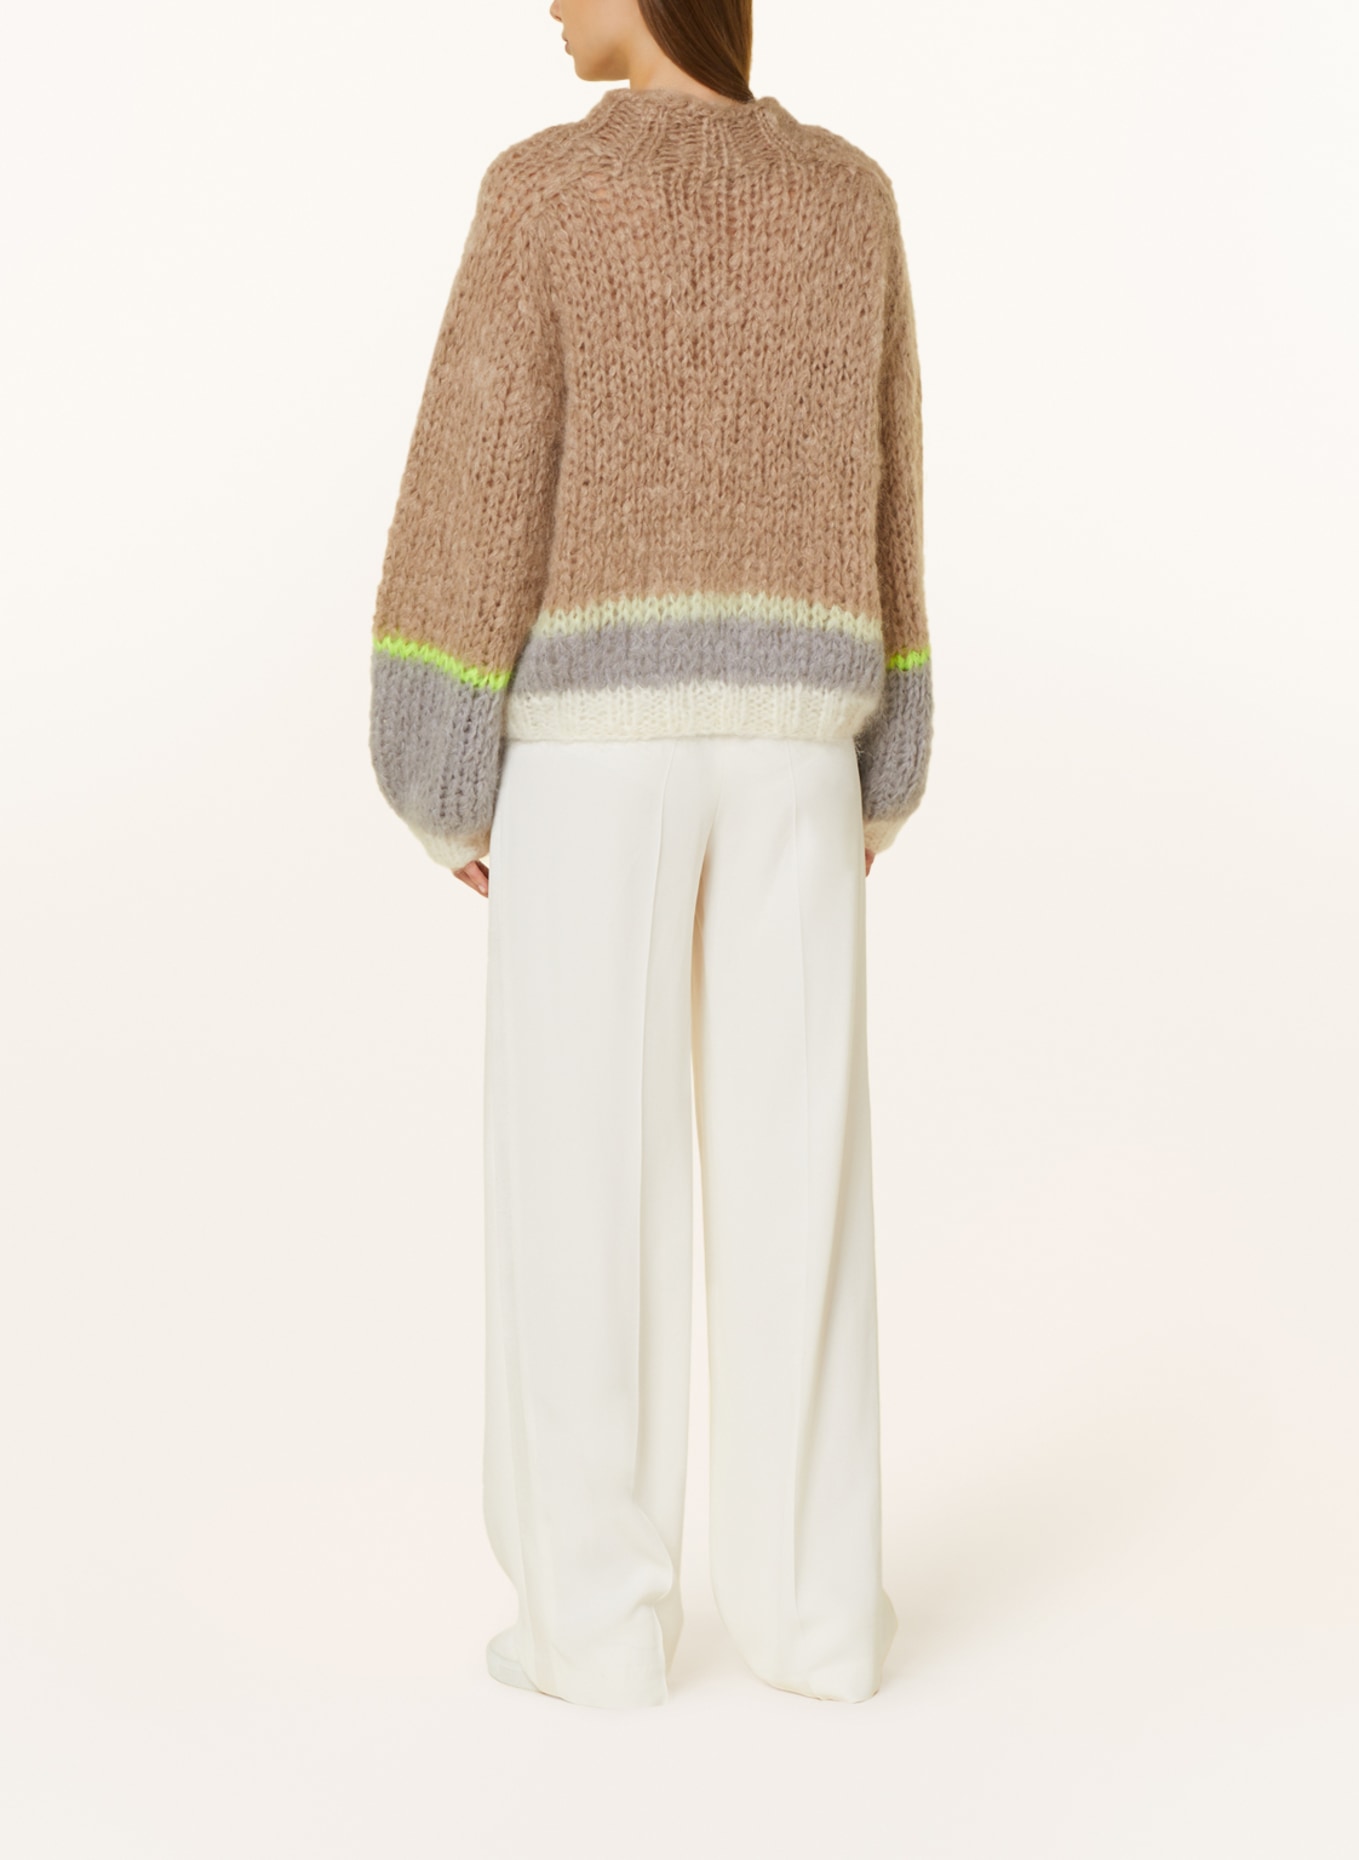 MAIAMI Mohair sweater, Color: BEIGE/ GRAY (Image 3)